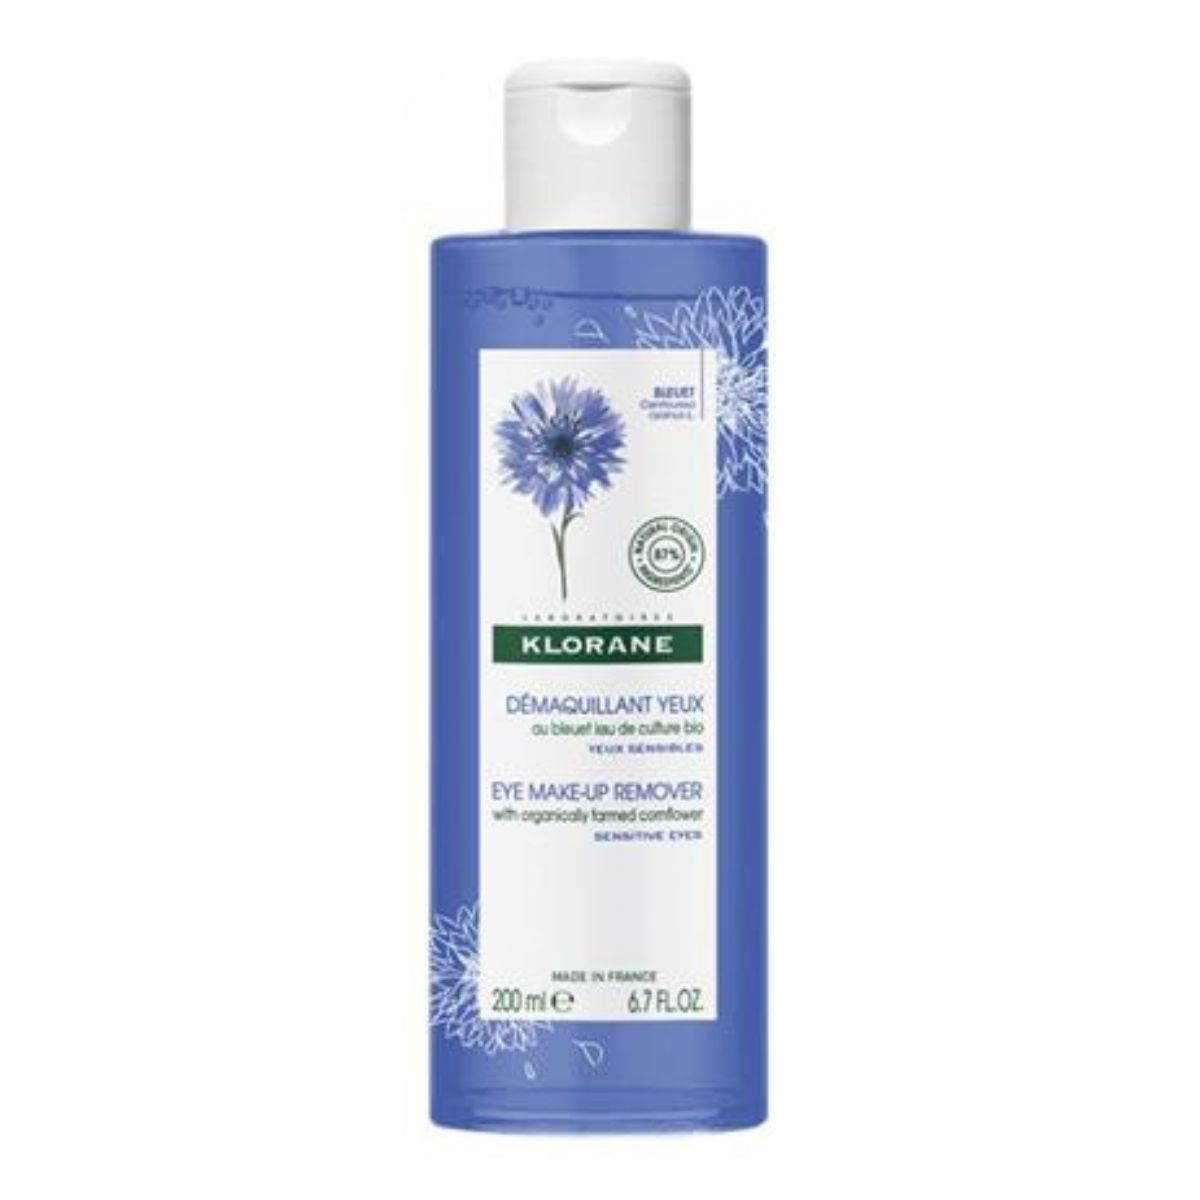 Klorane Soothing Eye Make-Up Remover 200ml. 60% OFF